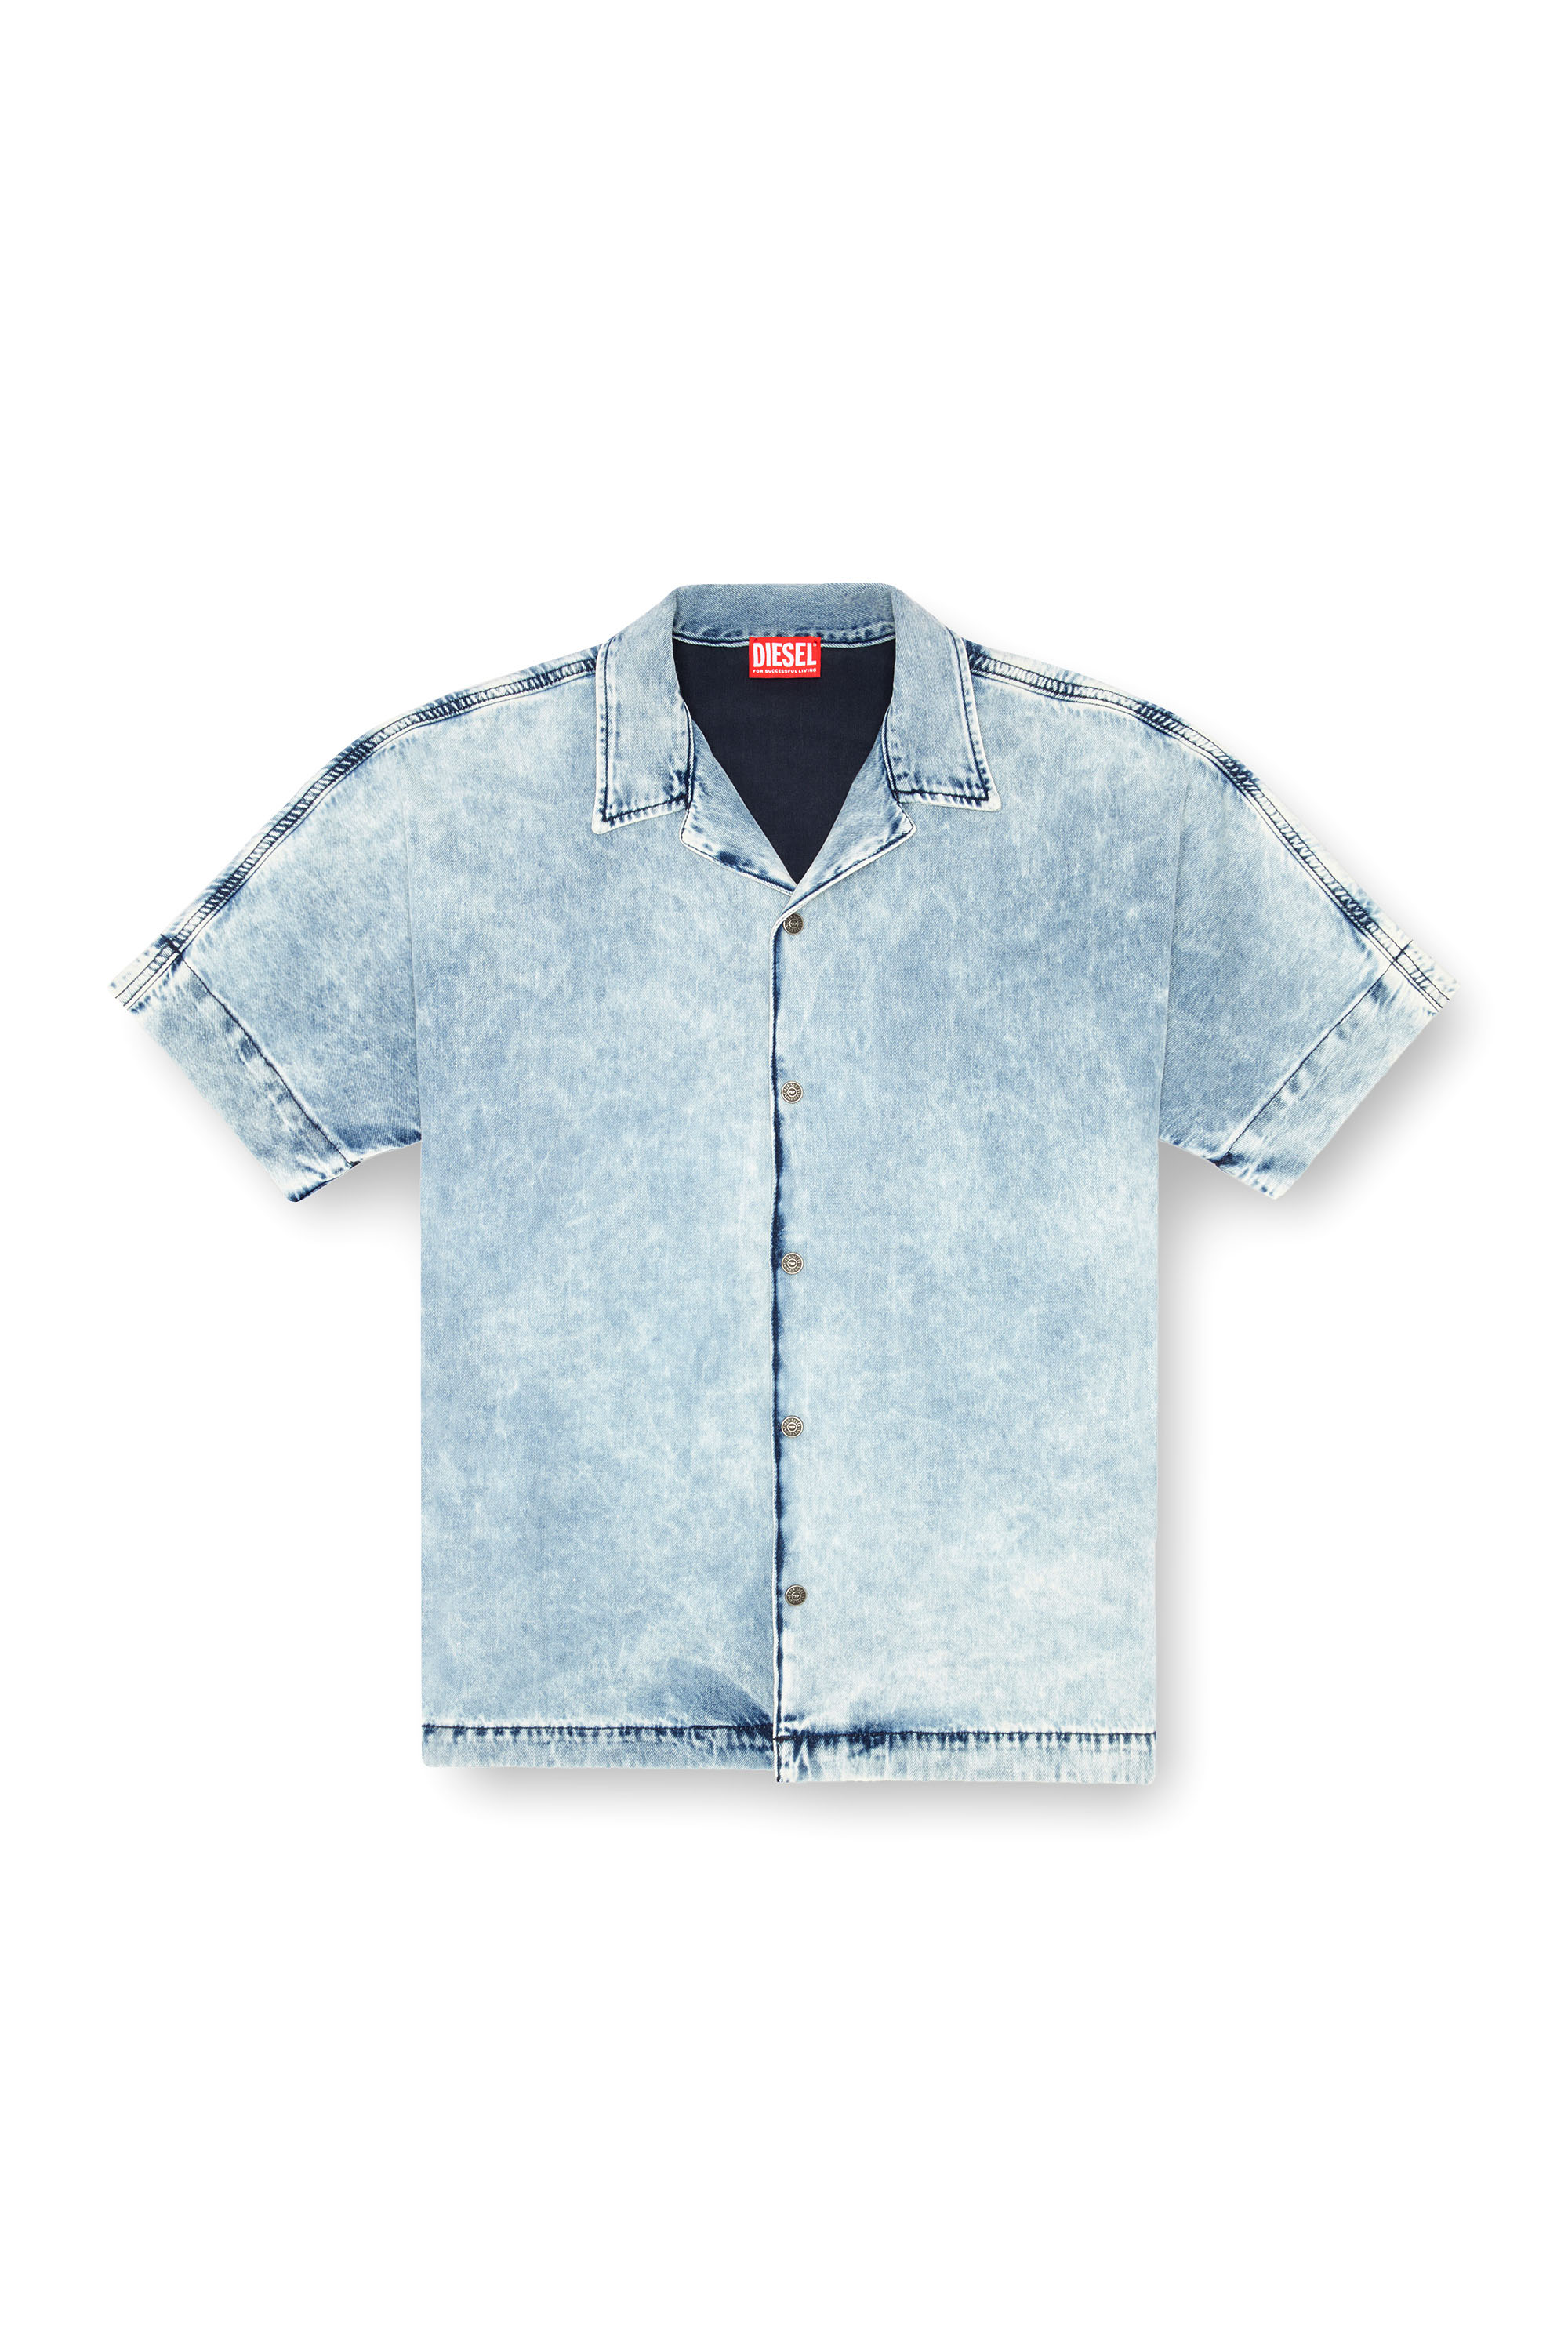 Diesel - D-NABIL-S, Male Denim bowling shirt with Oval D in ブルー - Image 3